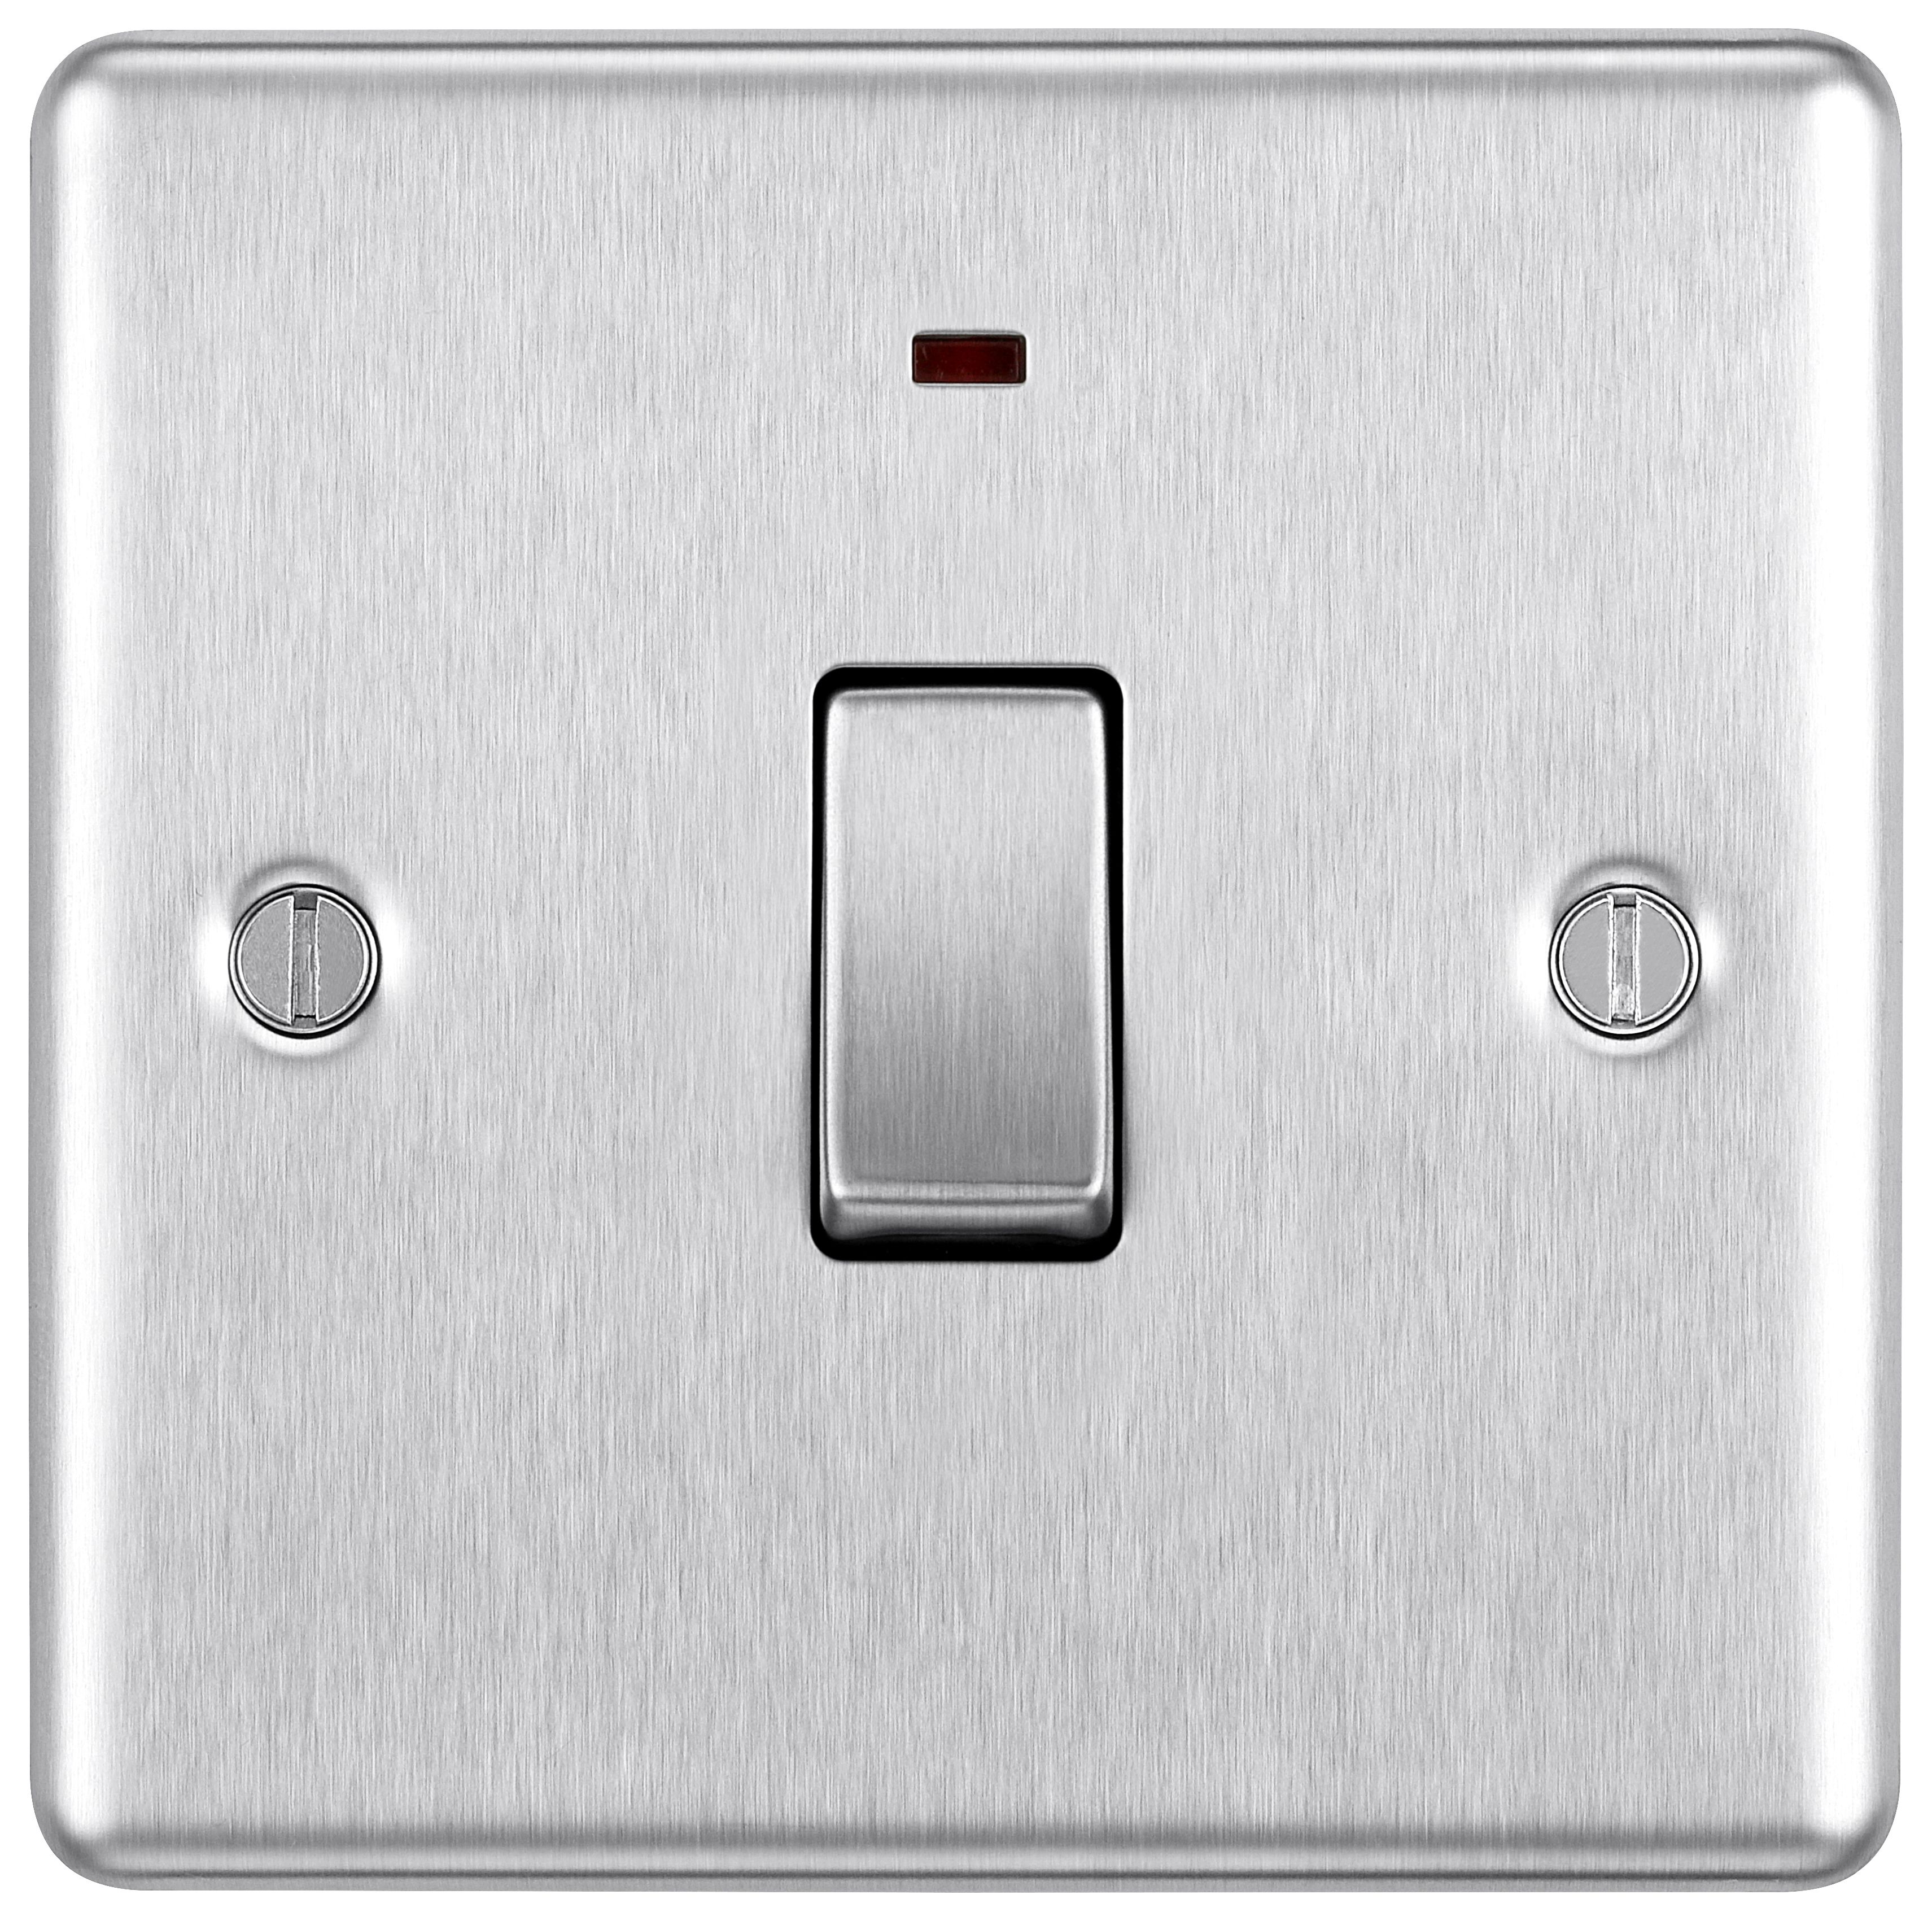 Image of BG 20A Screwed Raised Plate Single Switch With Power Indicator - Brushed Steel